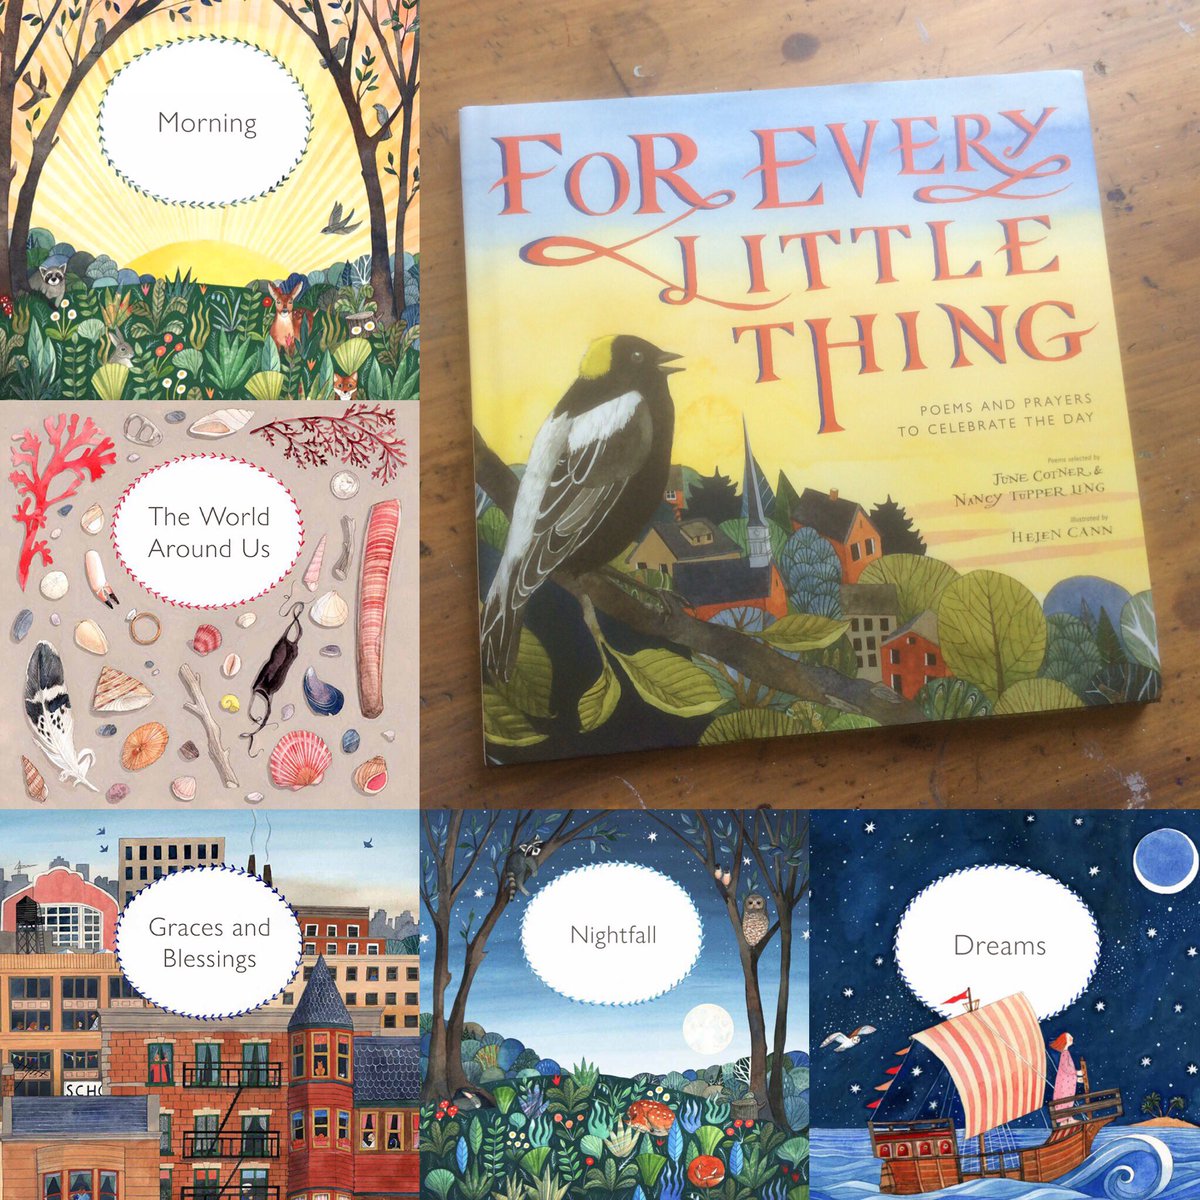 Happy World Gratitude Day and Happy Publication Day to ‘For Every Little Thing’. A little book full of big thank yous... #books #worldgratitudeday2021 @ebyrbooks @nancytupperling @JuneCotner